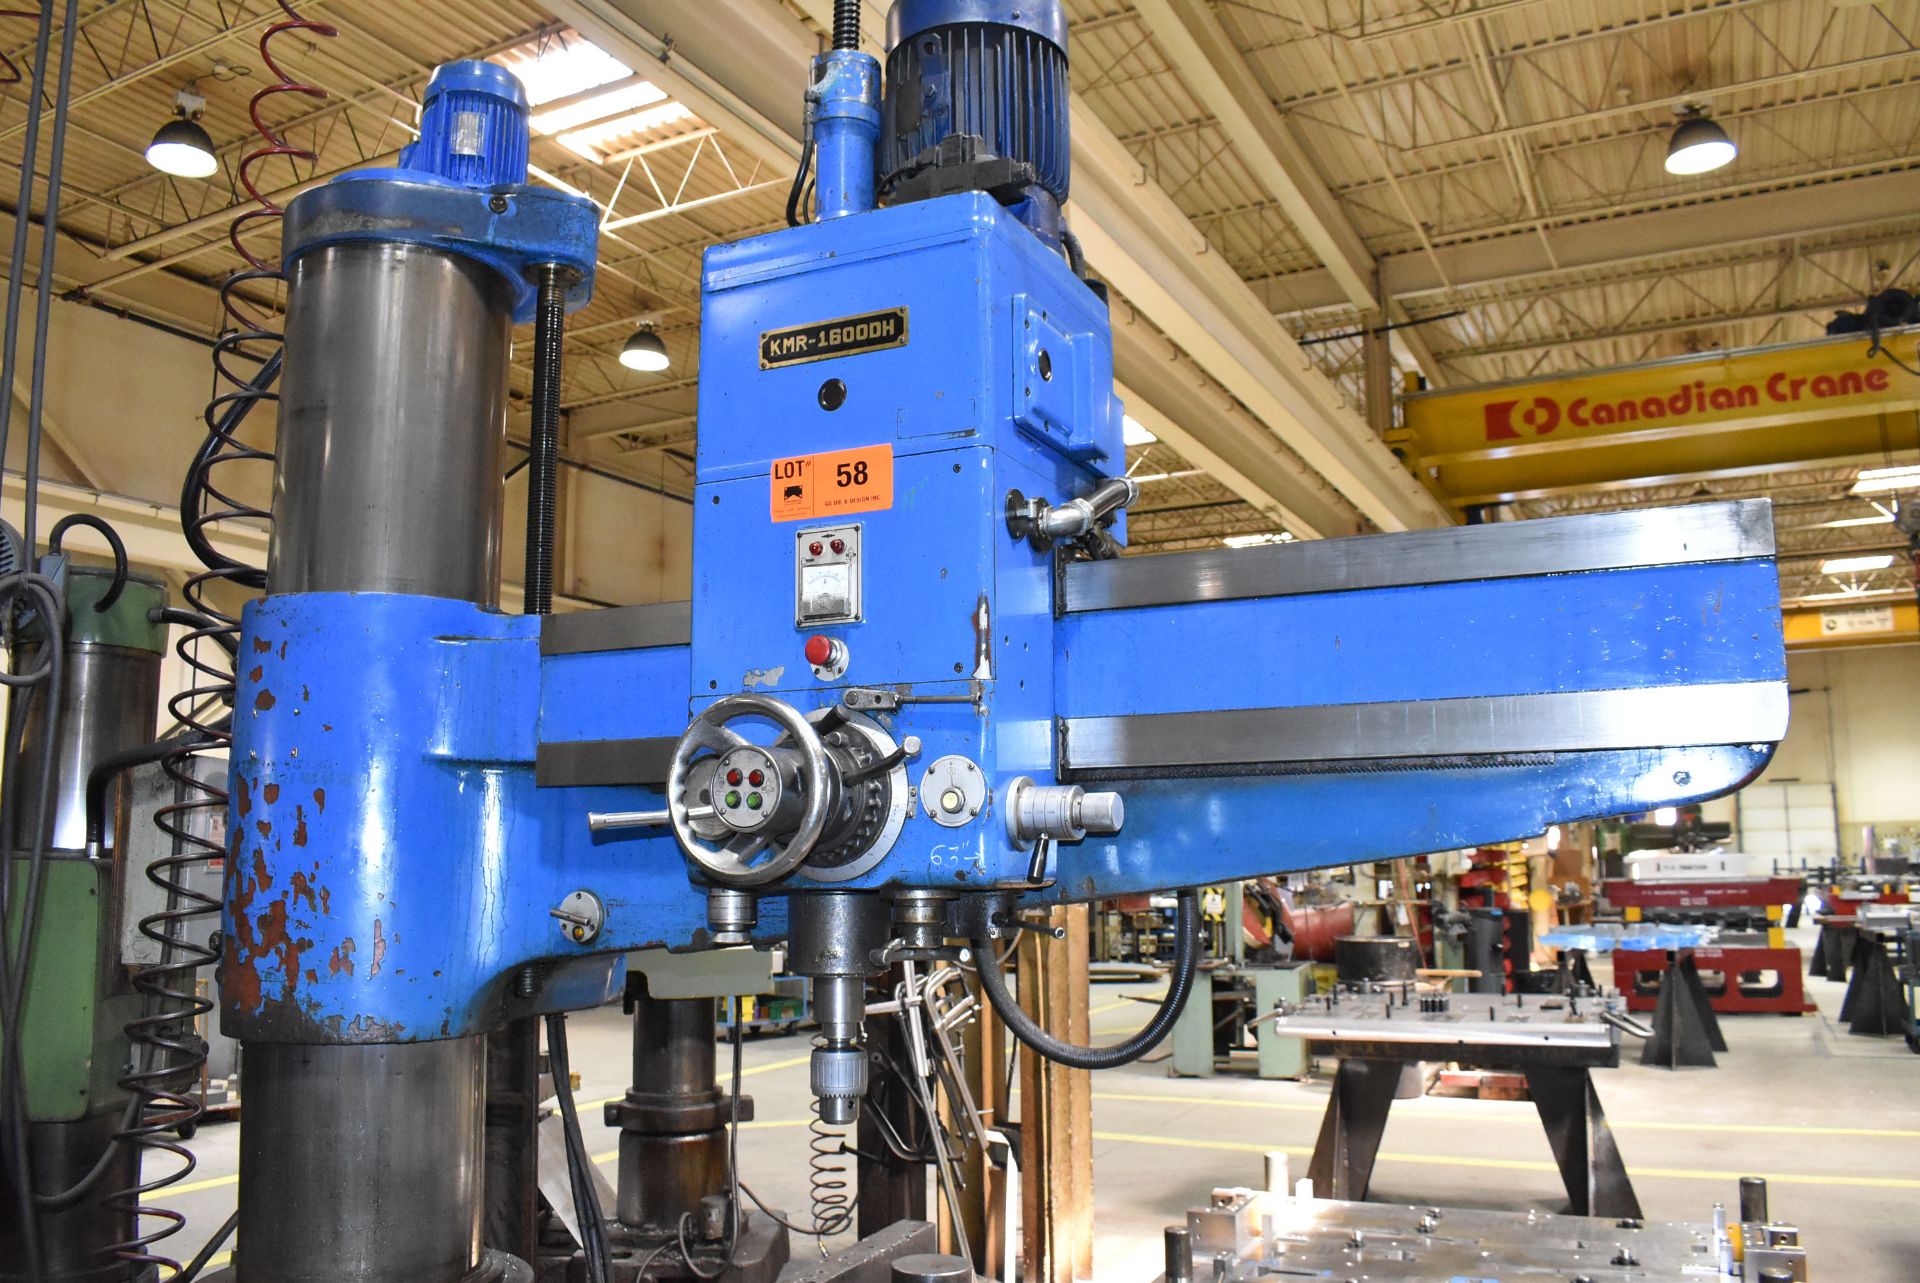 KAO MING KMR-1600DH 6' RADIAL ARM DRILLS WITH SPEEDS TO 1380 RPM, 66" COLUMN, 36" TRAVEL ON - Image 4 of 5